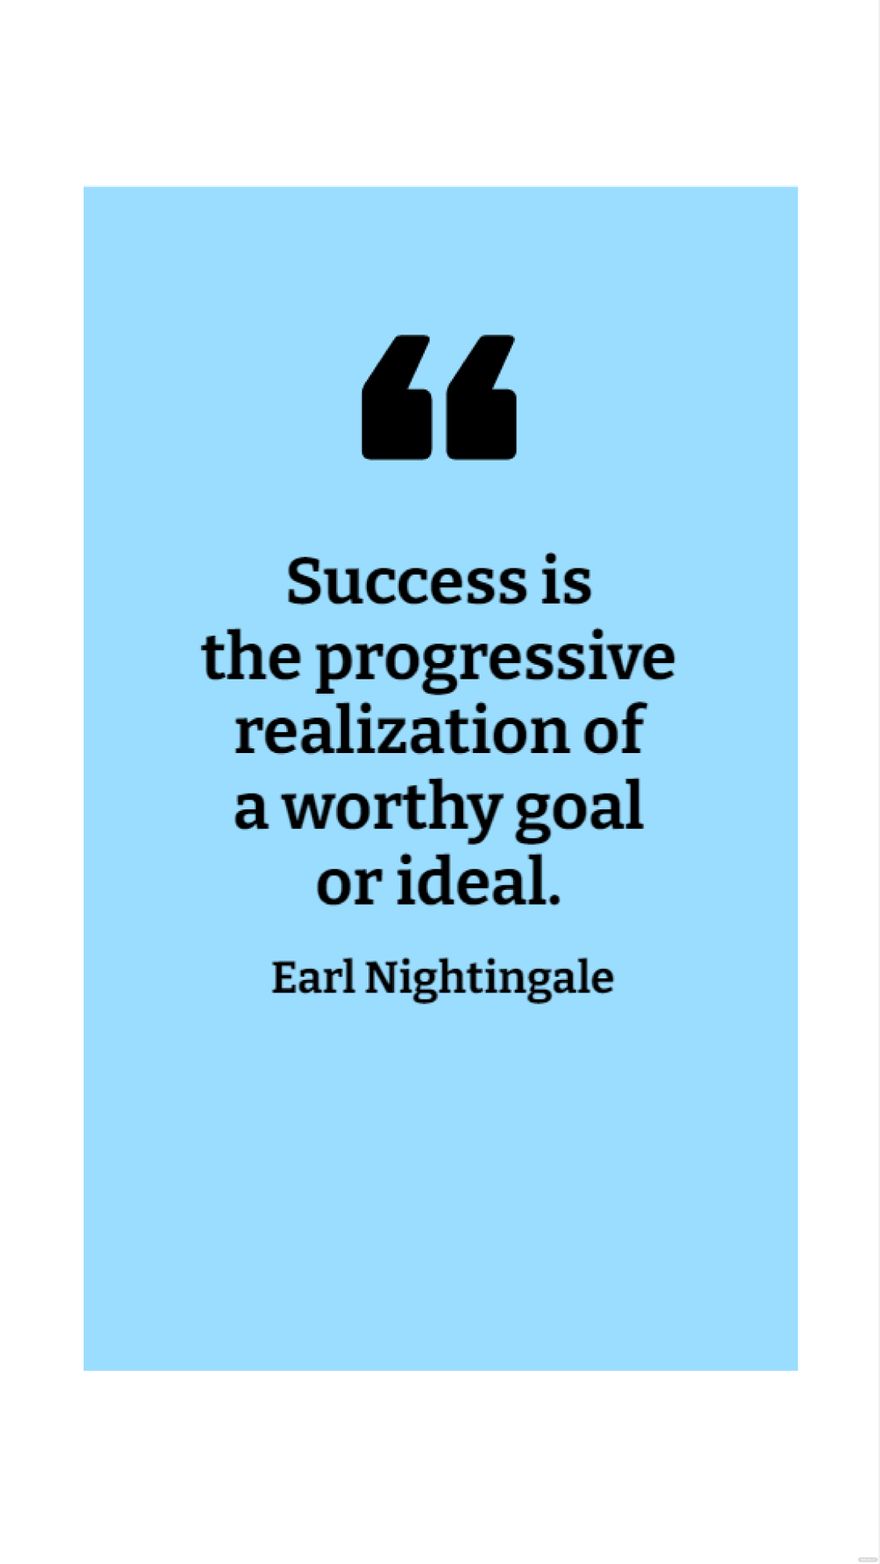 Free Earl Nightingale - Success is the progressive realization of a worthy goal or ideal. in JPG